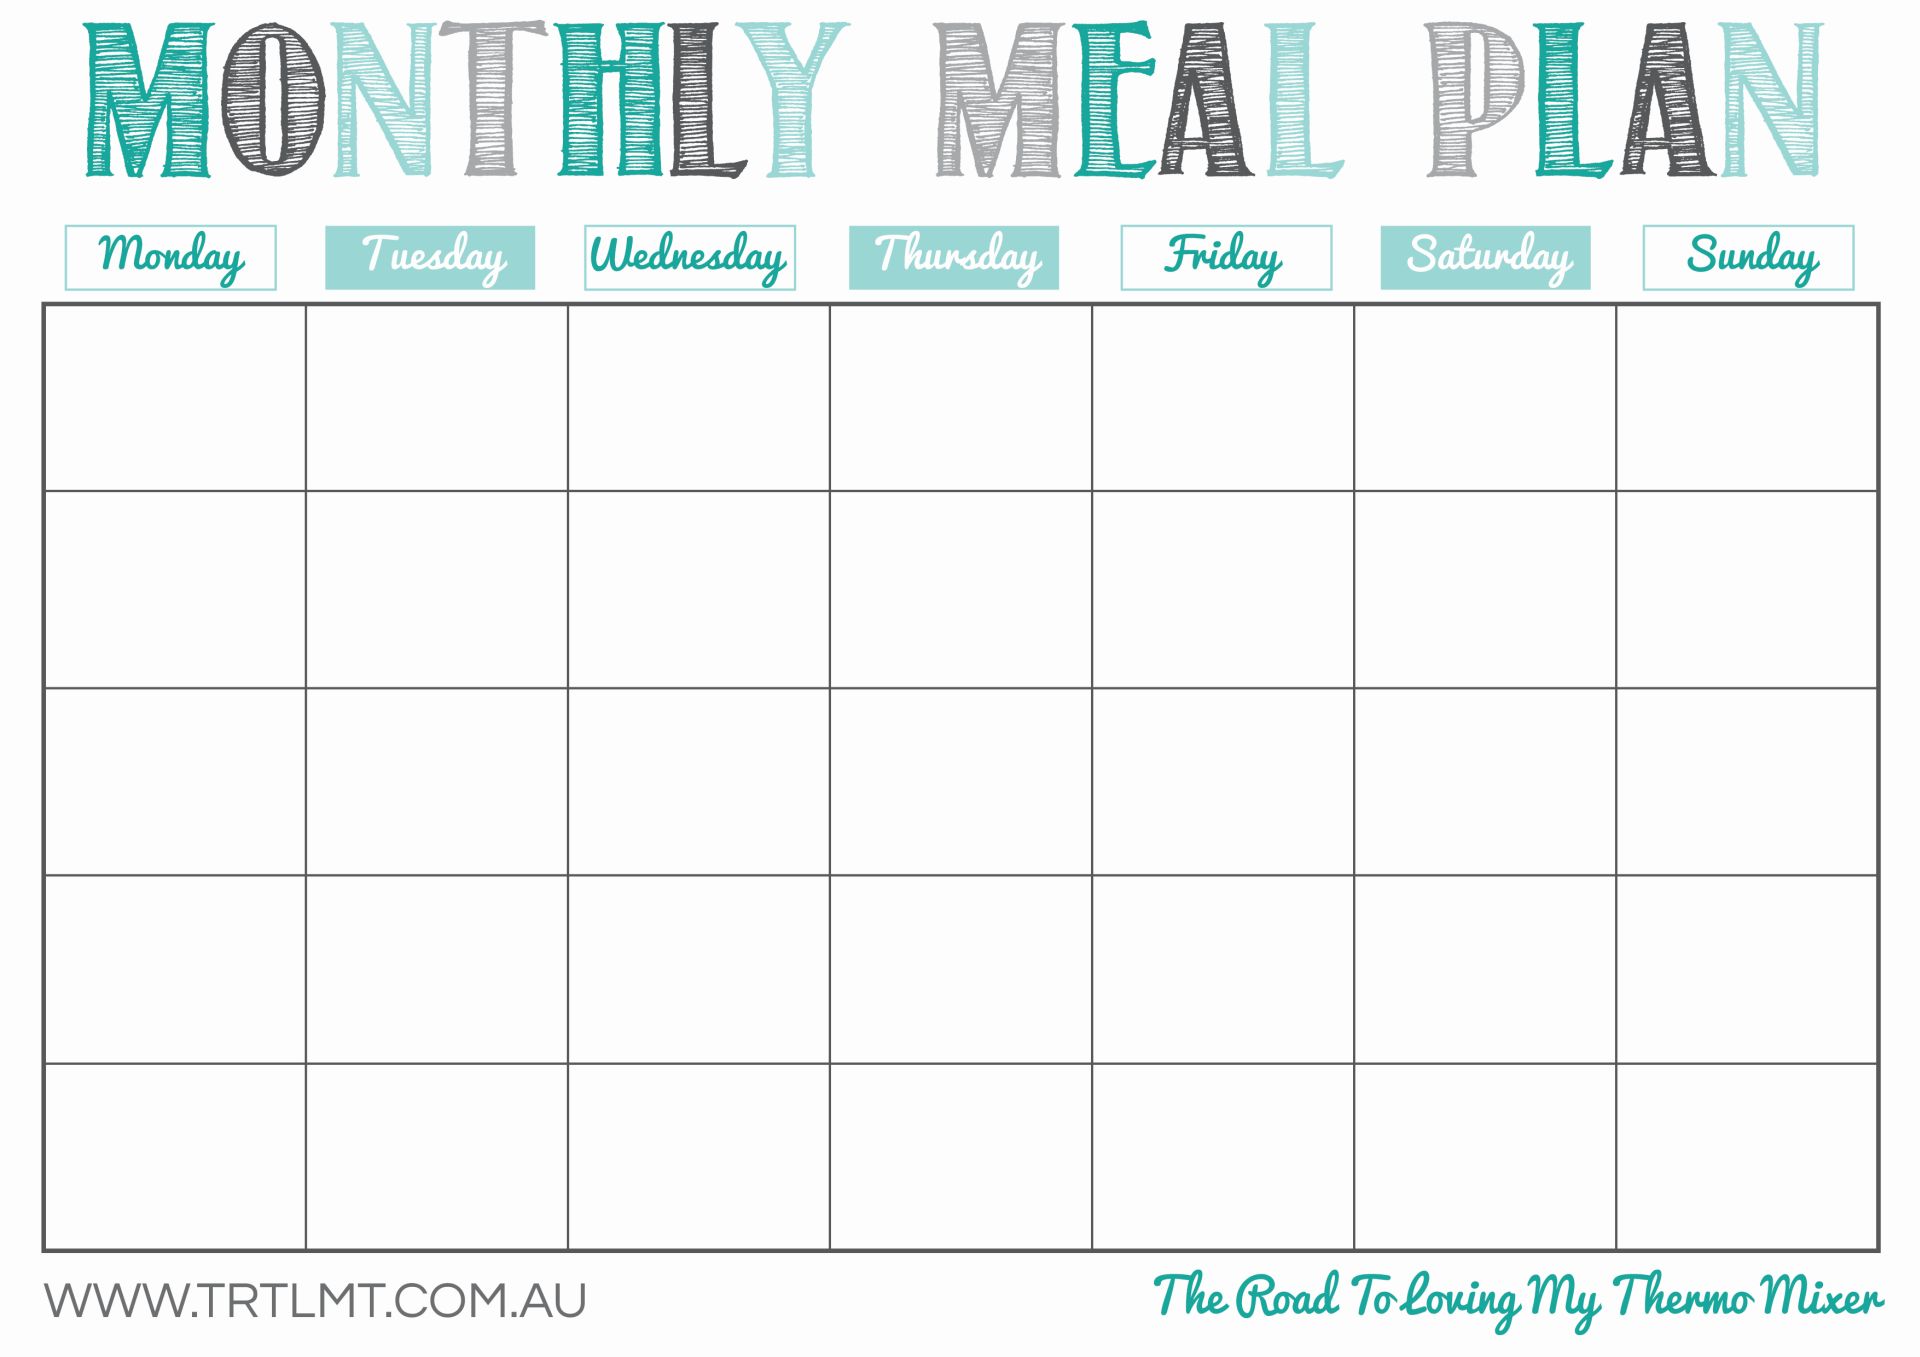 monthly meal calendar   Yelom.agdiffusion.com